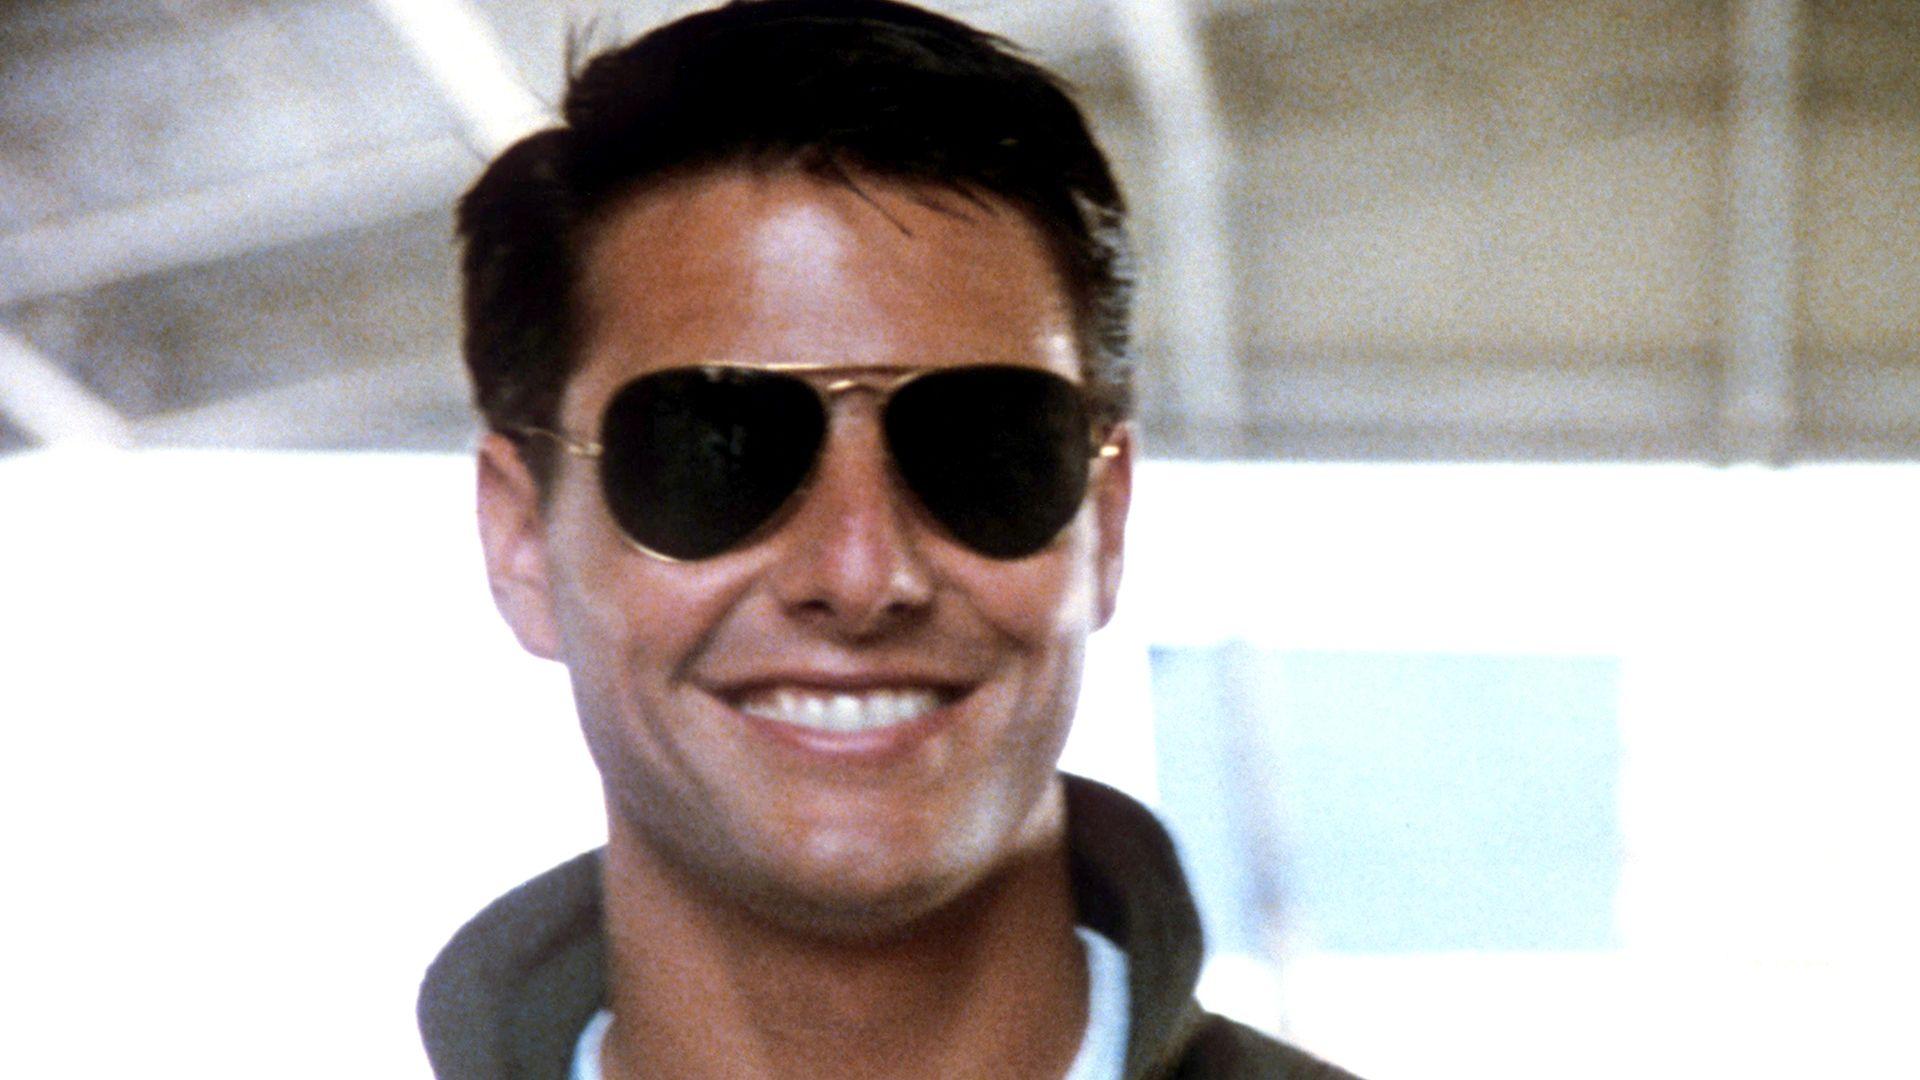 Top Gun 2' may be in the works: Will Maverick fly again?